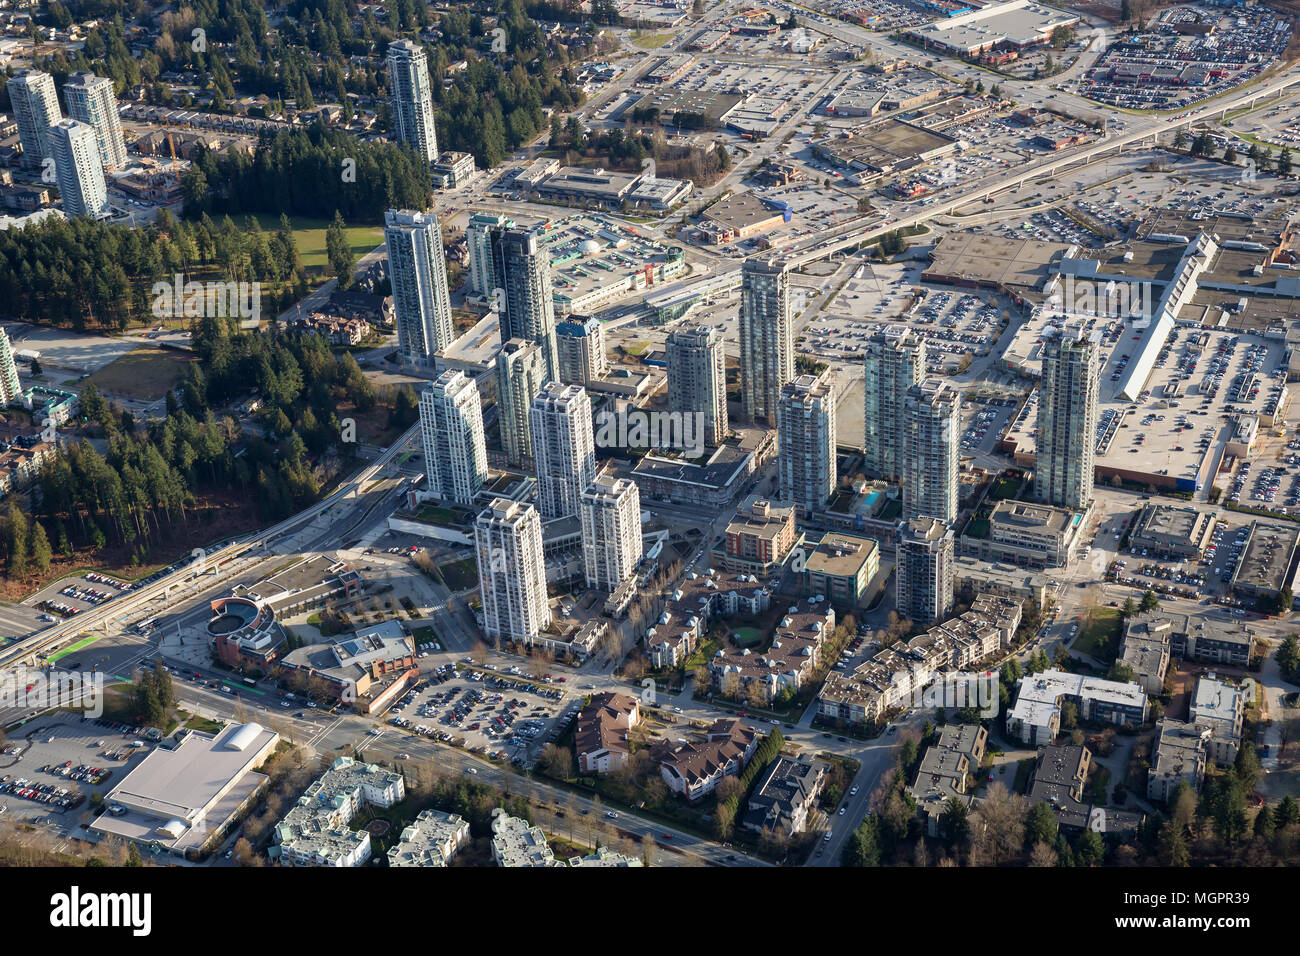 Coquitlam, Greater Vancouver, British Columbia, Canada - March 9, 2018: Aerial view of Residential Buildings and Shopping Mall. Stock Photo